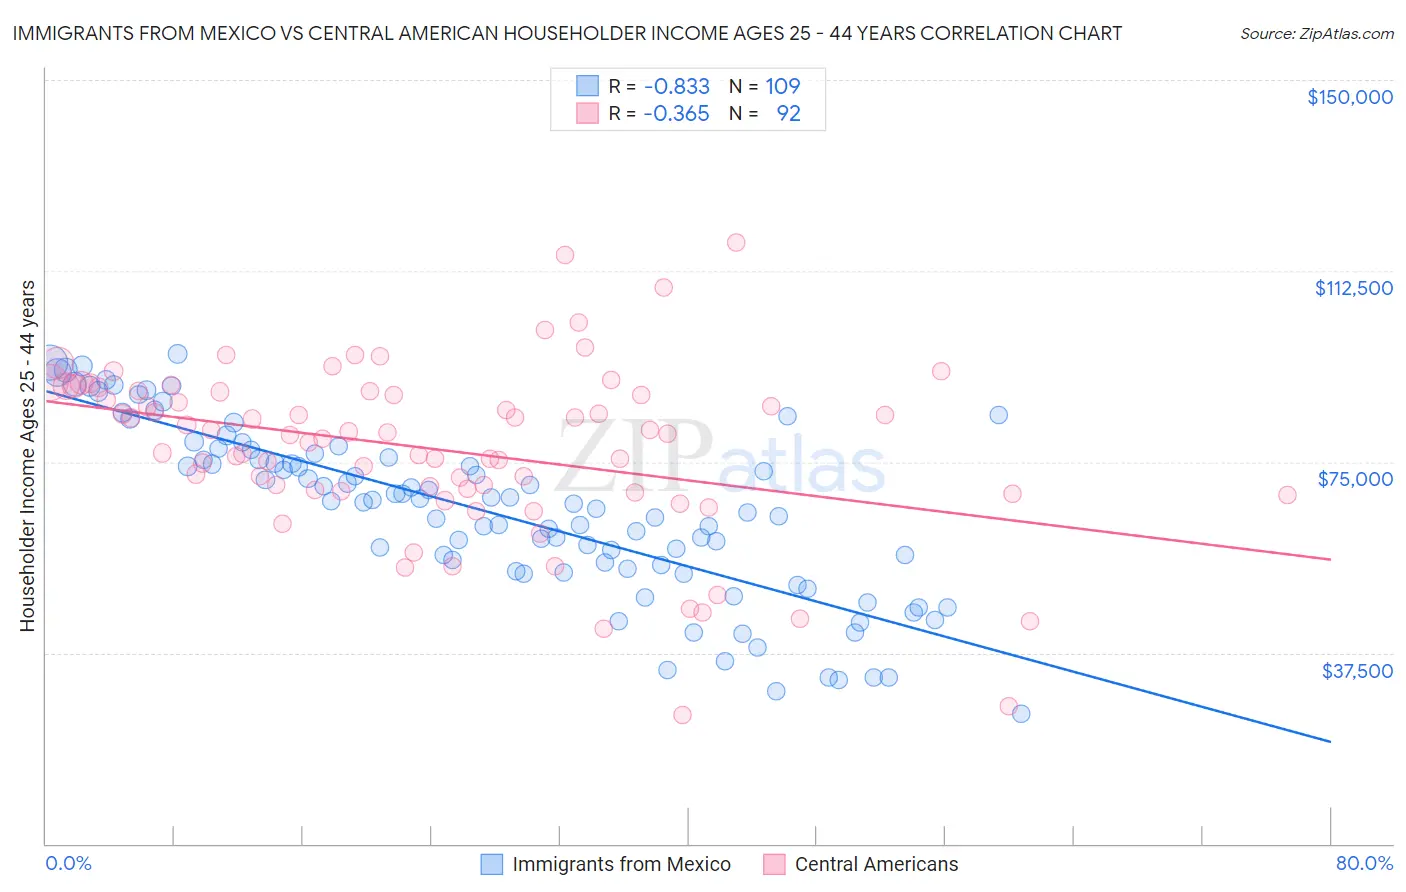 Immigrants from Mexico vs Central American Householder Income Ages 25 - 44 years